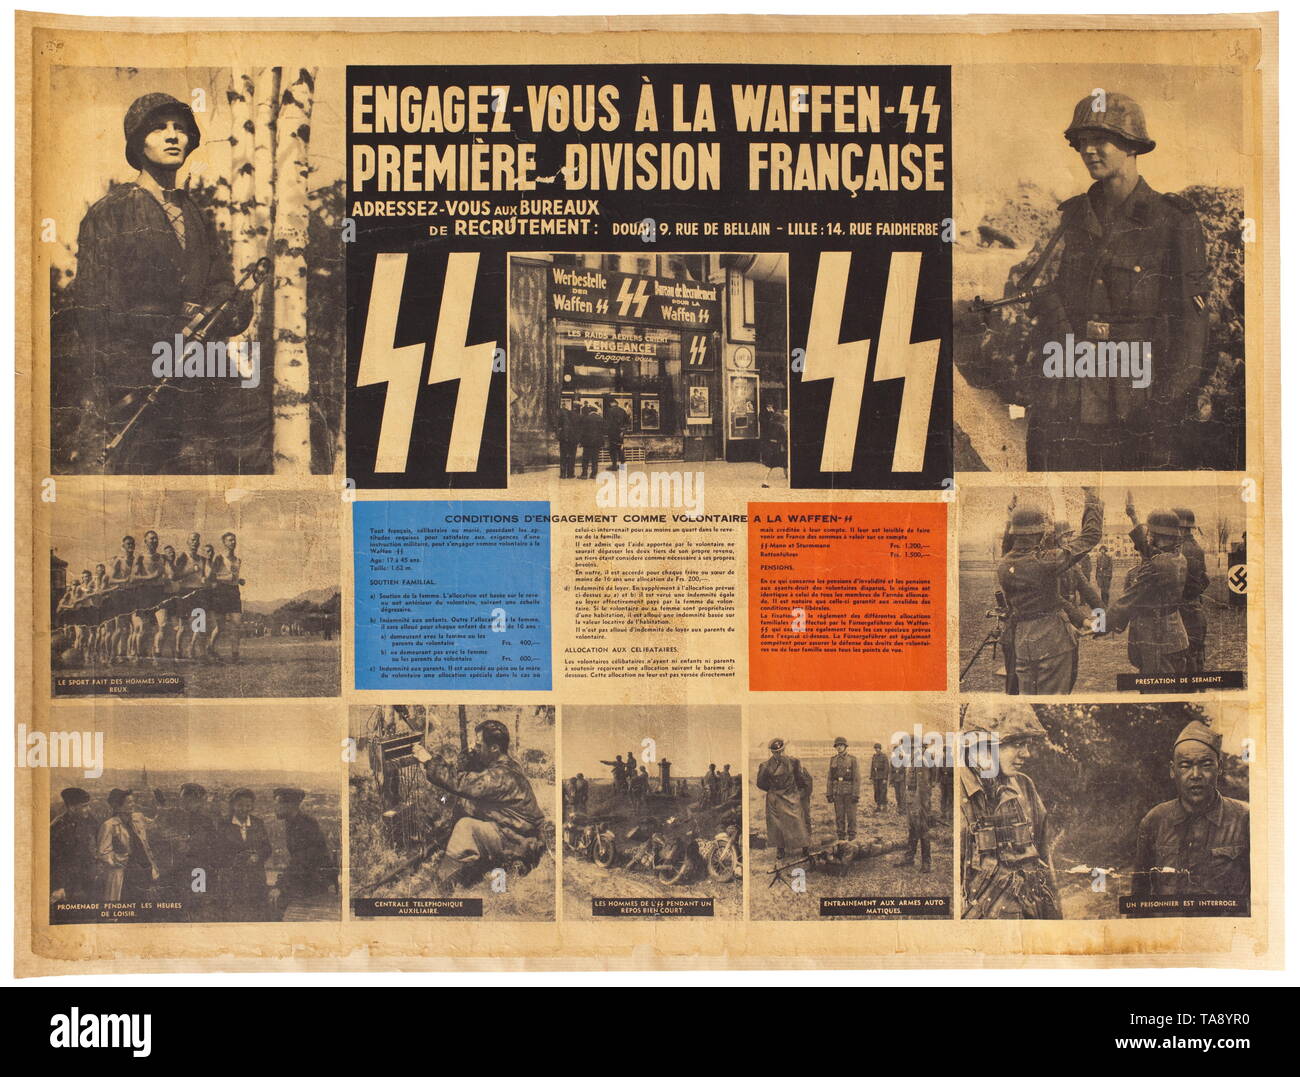 A French propaganda poster advertising the Waffen-SS 'Engagez-vous à  la Waffen-SS - Première Division Francaise' historic, historical, 20th century, 1930s, 1940s, Waffen-SS, armed division of the SS, armed service, armed services, NS, National Socialism, Nazism, Third Reich, German Reich, Germany, military, militaria, utensil, piece of equipment, utensils, object, objects, stills, clipping, clippings, cut out, cut-out, cut-outs, fascism, fascistic, National Socialist, Nazi, Nazi period, Editorial-Use-Only Stock Photo